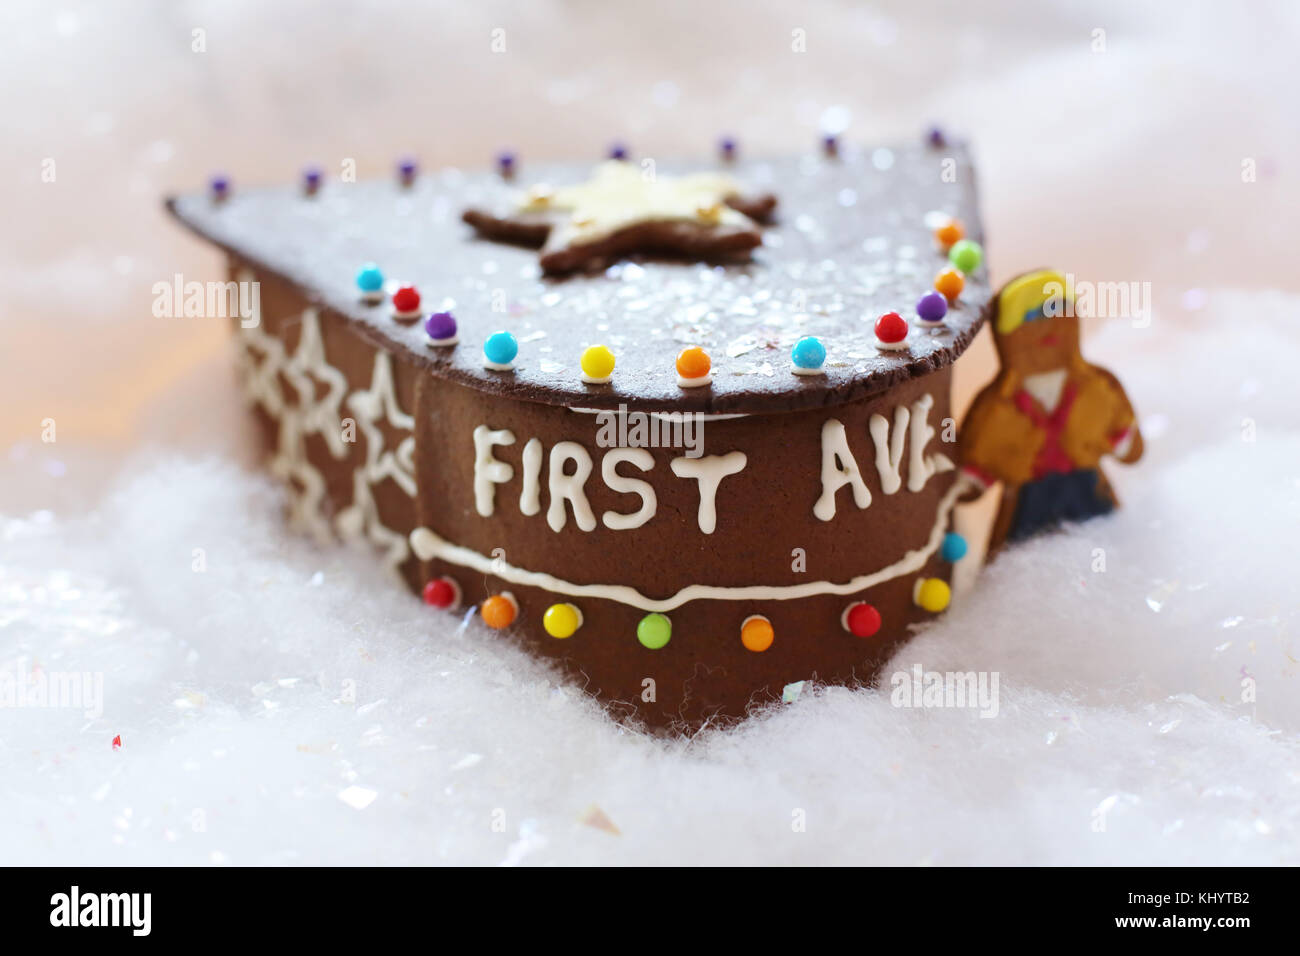 Minneapolis, Minnesota, USA. 21st November, 2017. A replica of First Avenue Nightclub in Minneapolis, made of gingerbread, in the gingerbread house building competition, at Norway House in Minneapolis, Minnesota. Copyright Gina Kelly/Alamy Live News Stock Photo